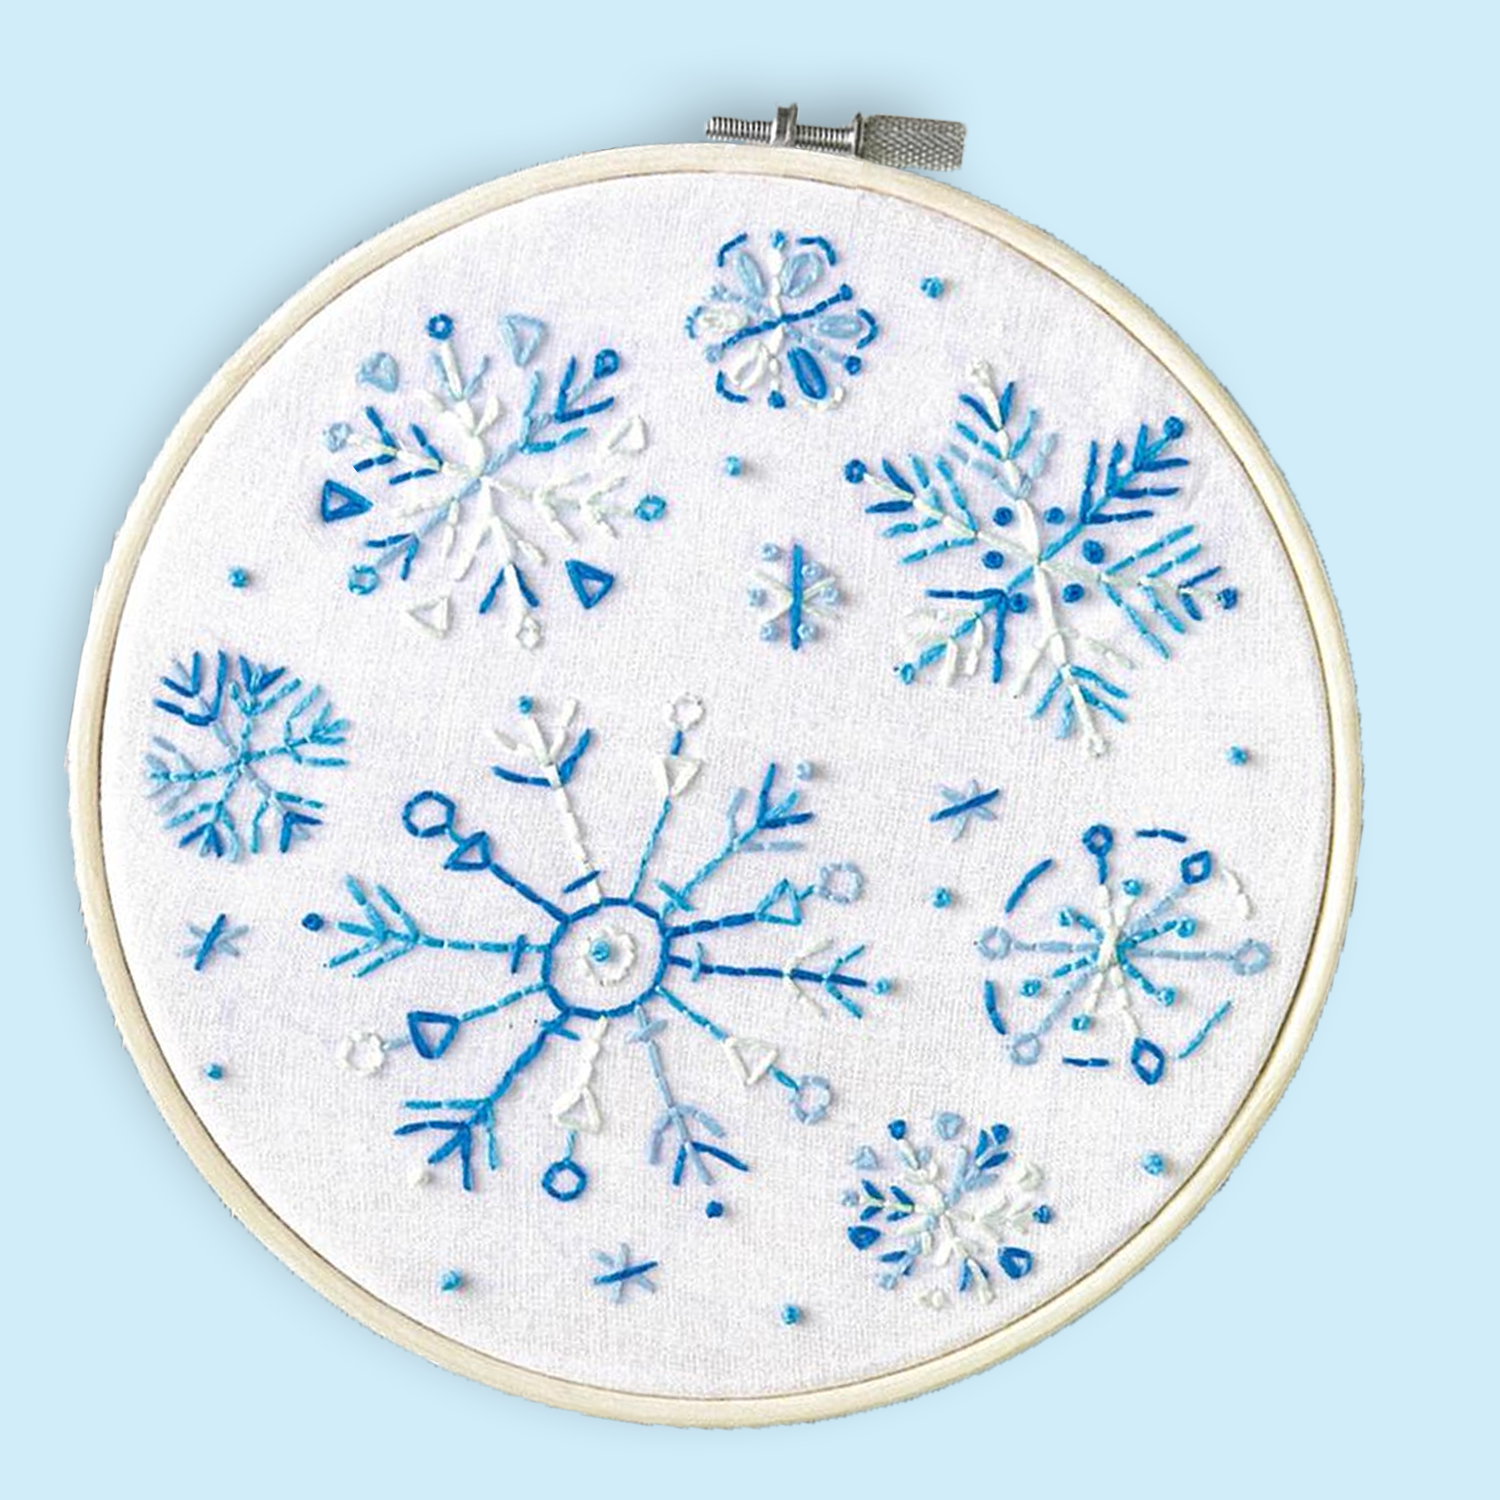 Leisure Arts Embroidery Kit 6 Snow Day - embroidery kit for beginners -  embroidery kit for adults - cross stitch kits - cross stitch kits for  beginners - embroidery patterns 